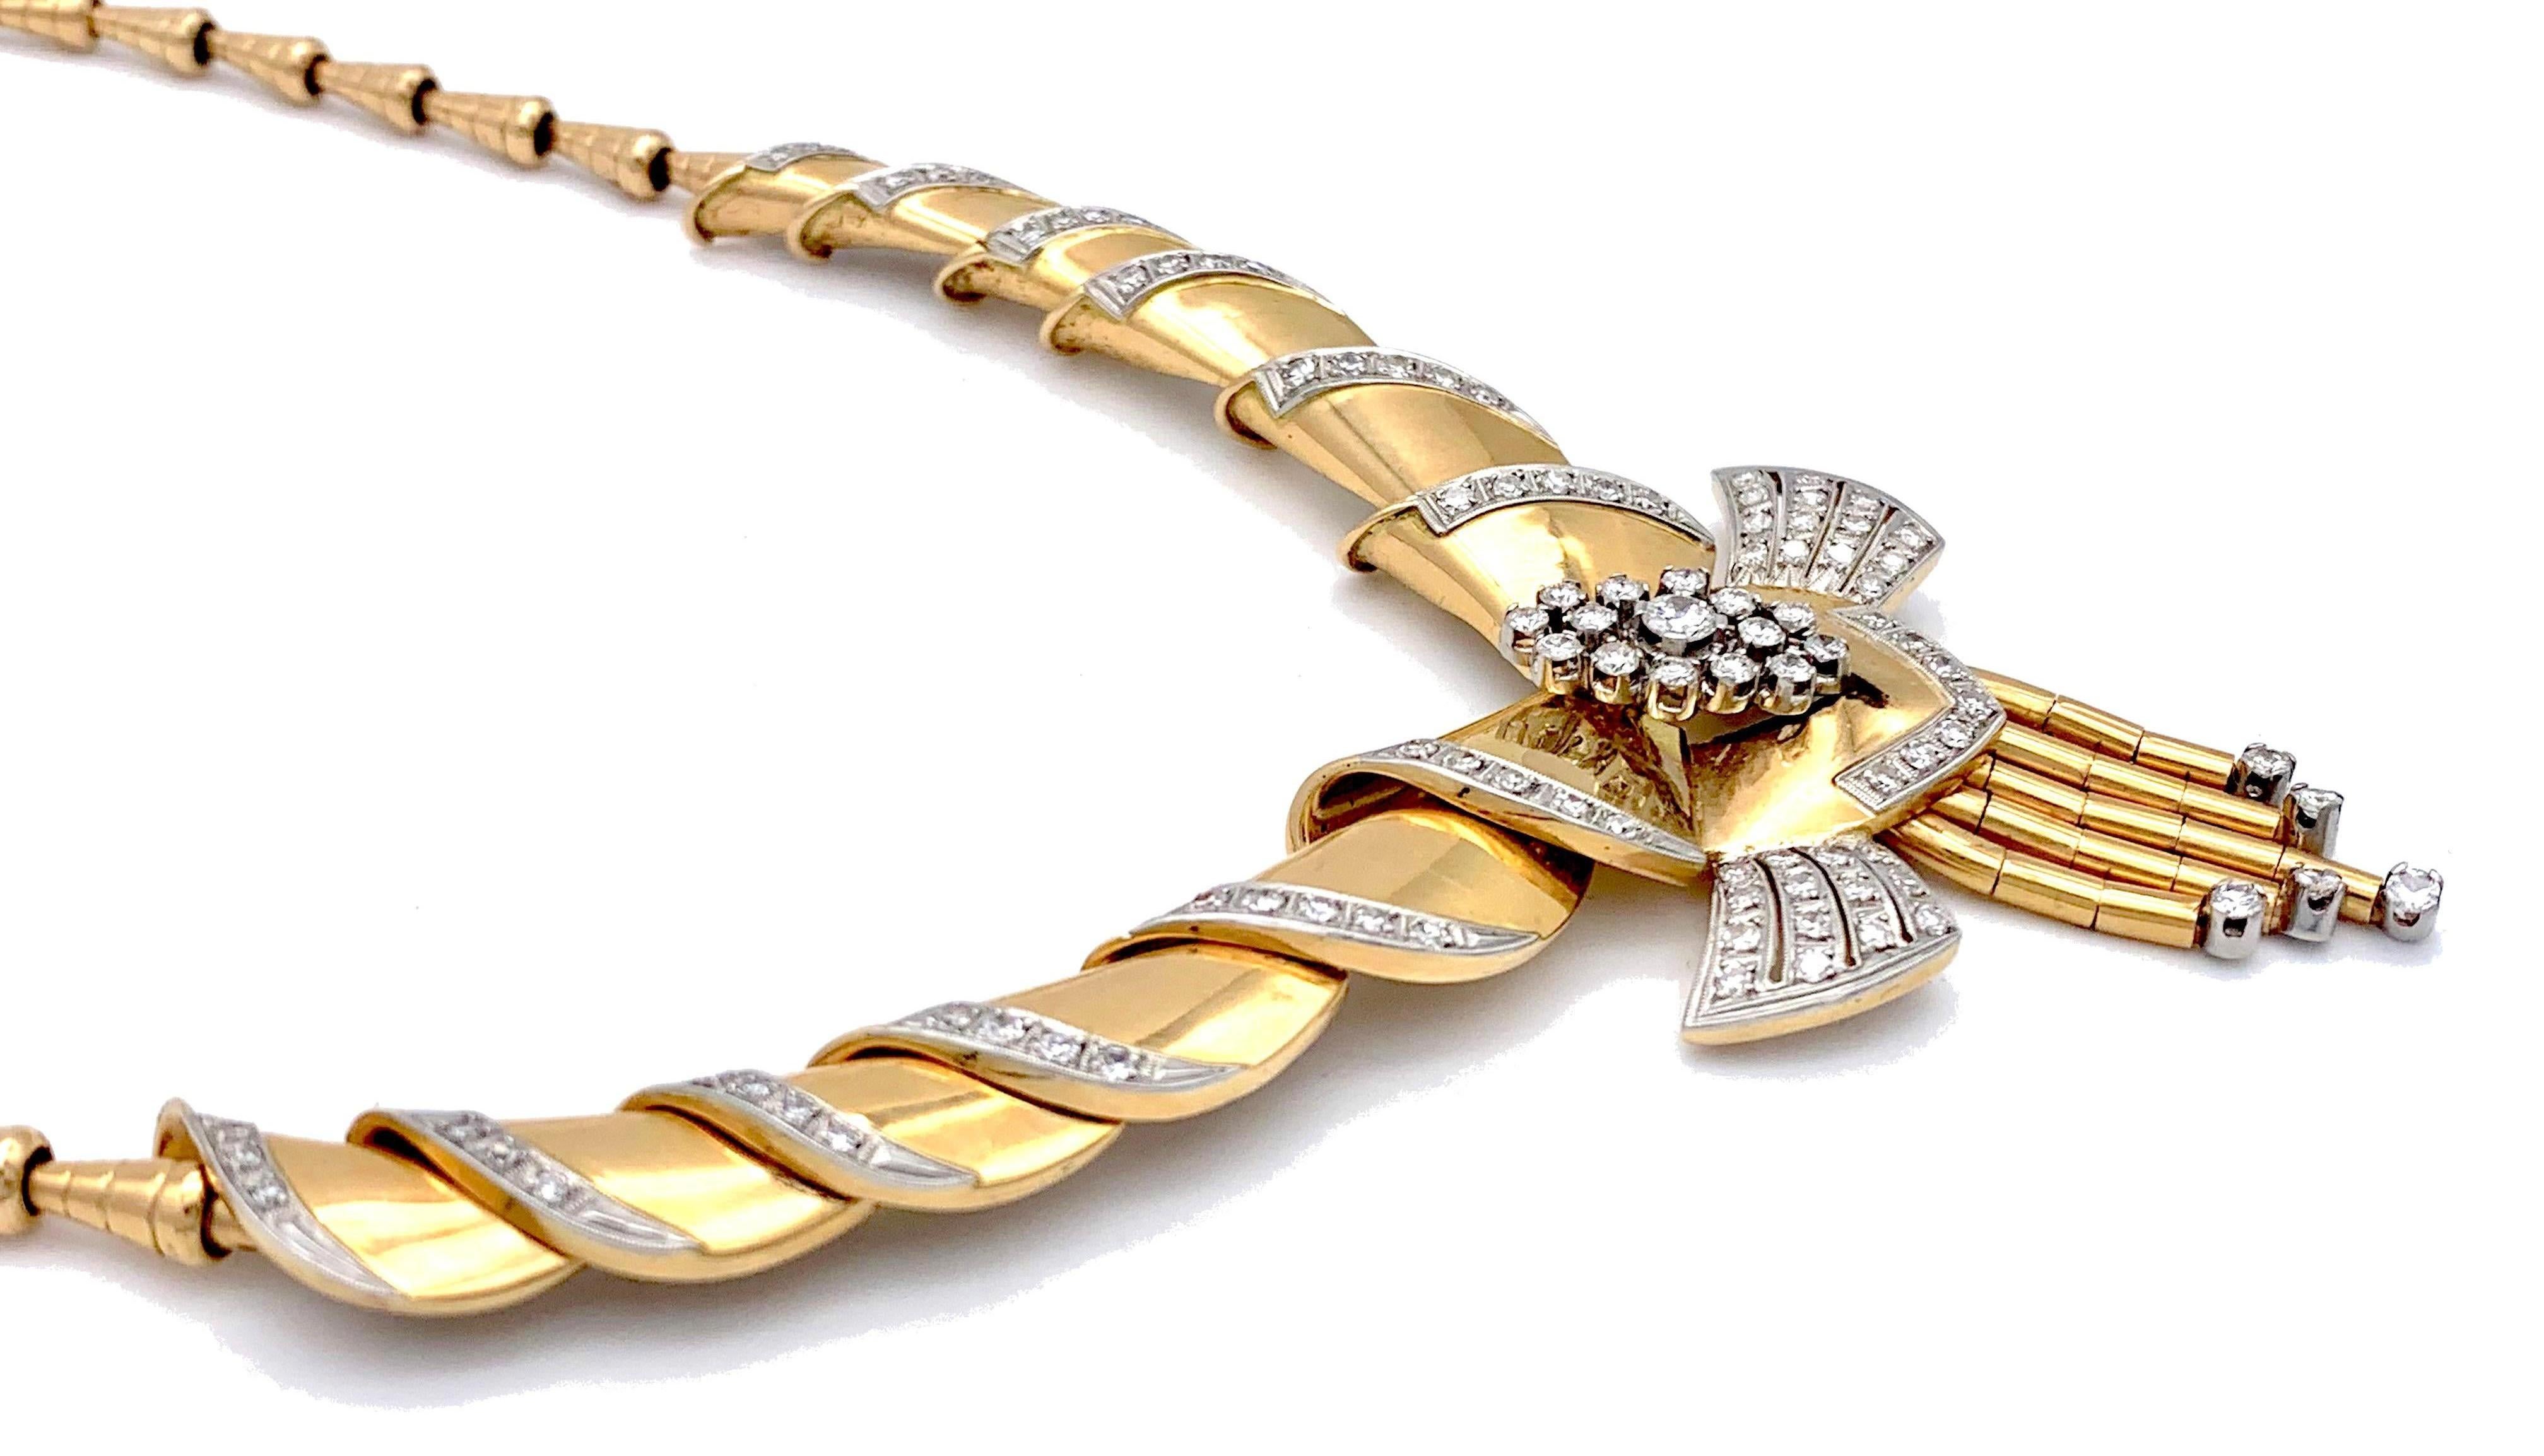 This stunning Retro necklace has been made out of 18 Karat gold in the late 1940's. Cone shaped elements of various sizes have been connected to make up this faboulous piece of jewellery. The front  of the necklace is designed as a series of  half